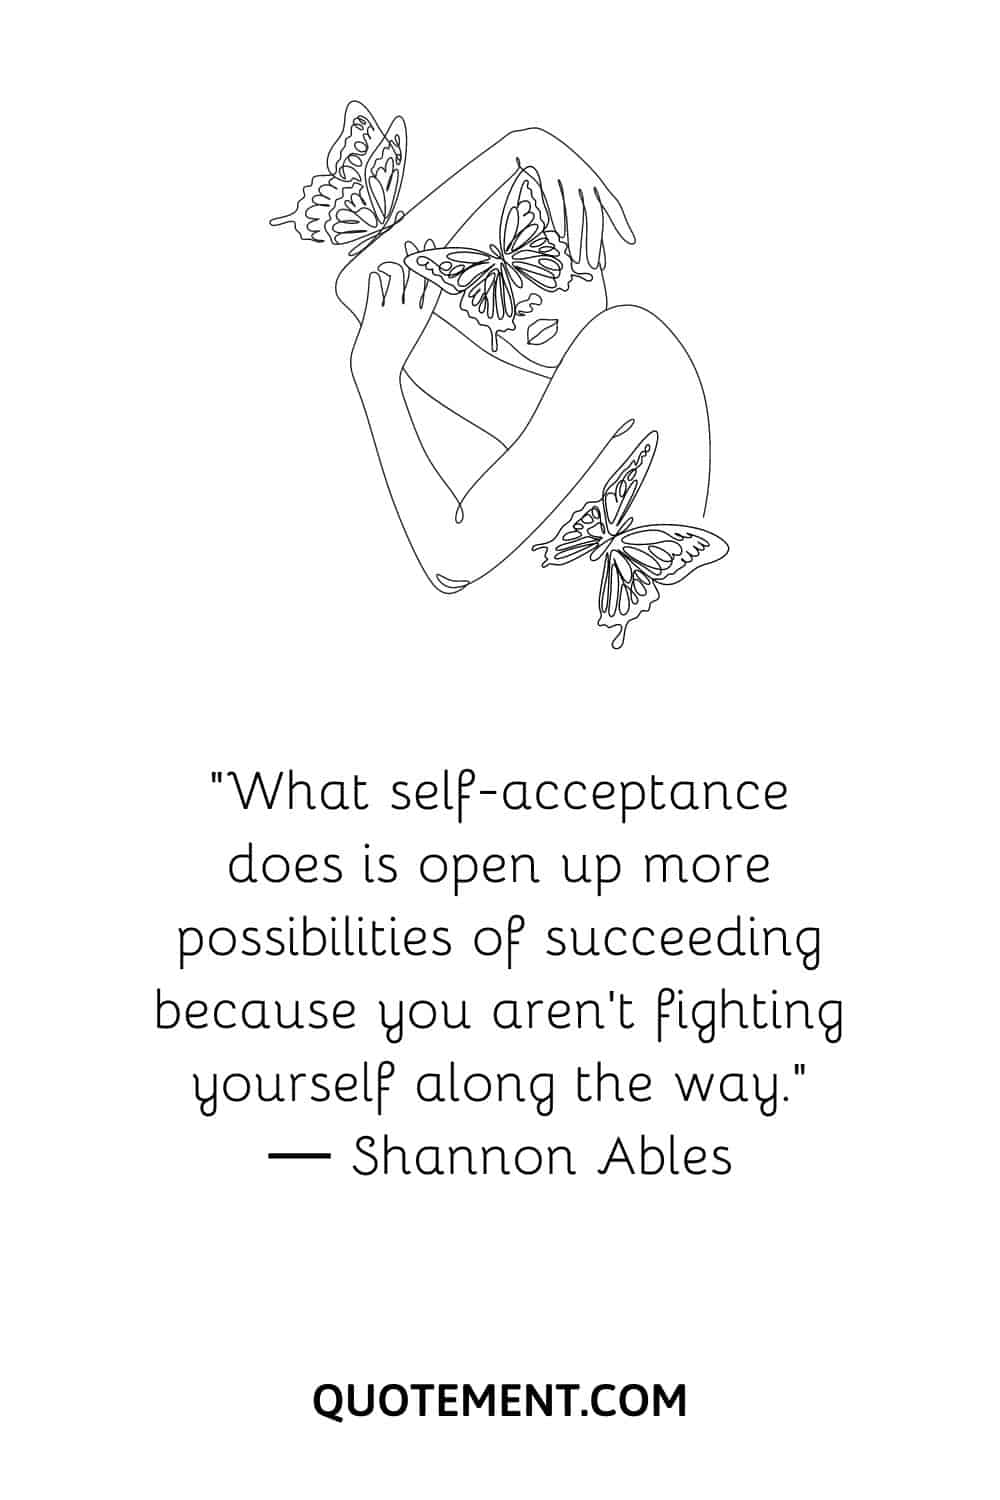 “What self-acceptance does is open up more possibilities of succeeding because you aren’t fighting yourself along the way.” ― Shannon Ables